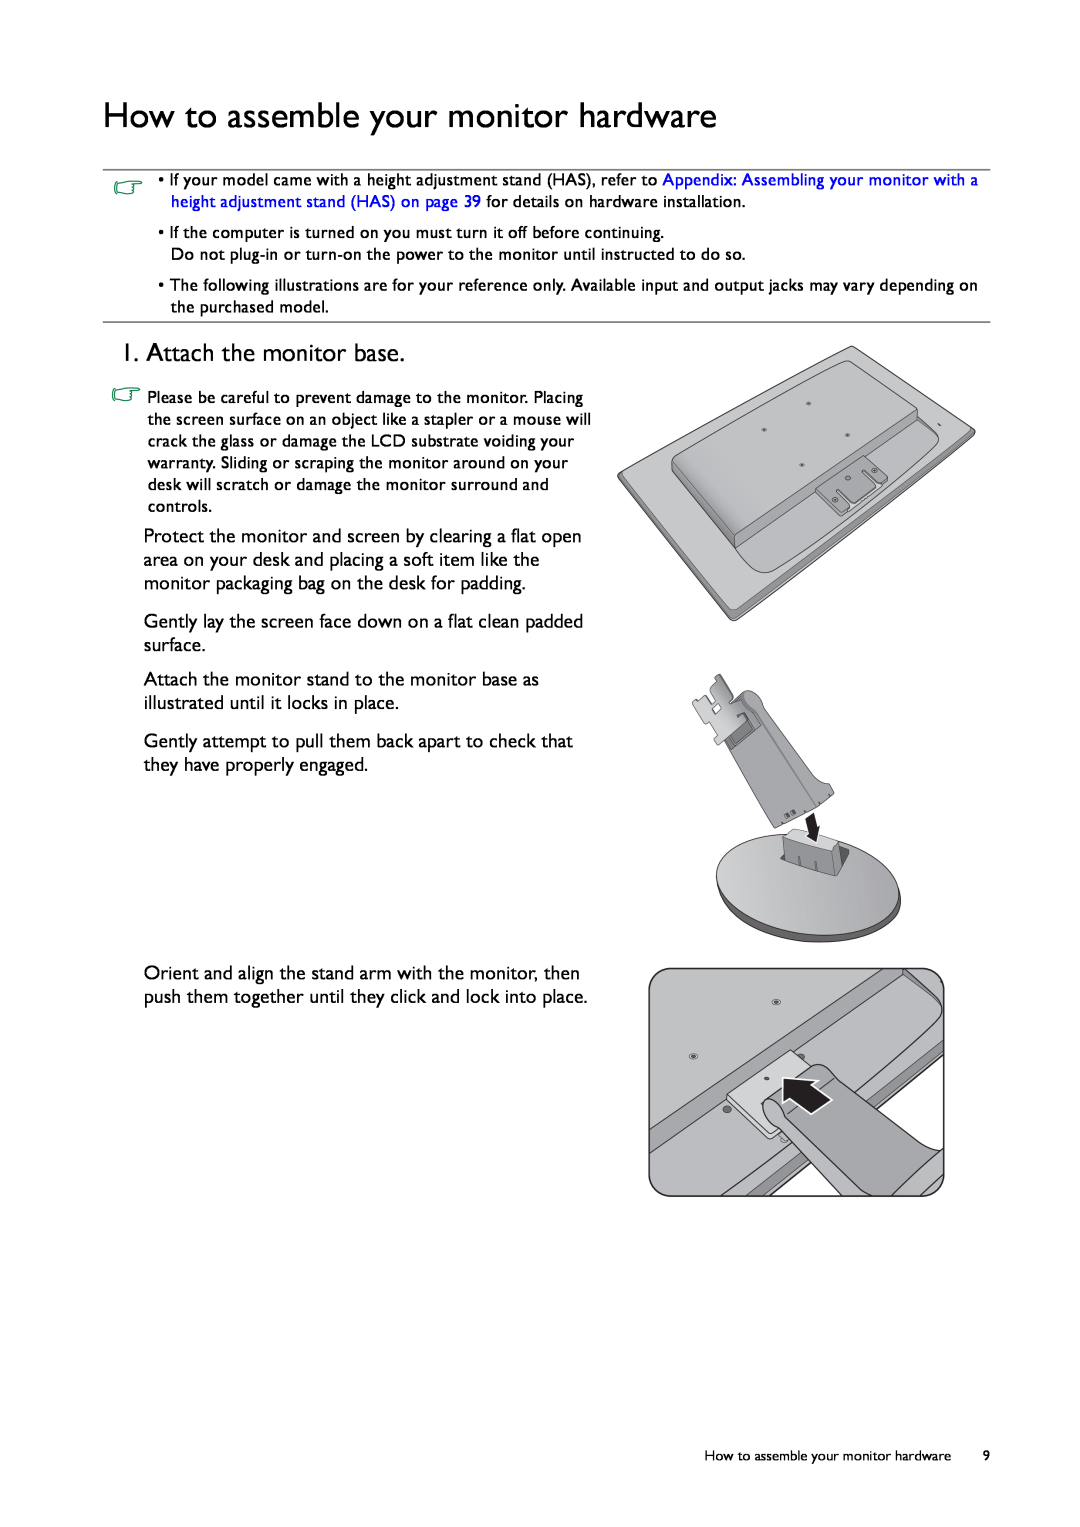 BenQ GL50, G50 user manual How to assemble your monitor hardware, Attach the monitor base 